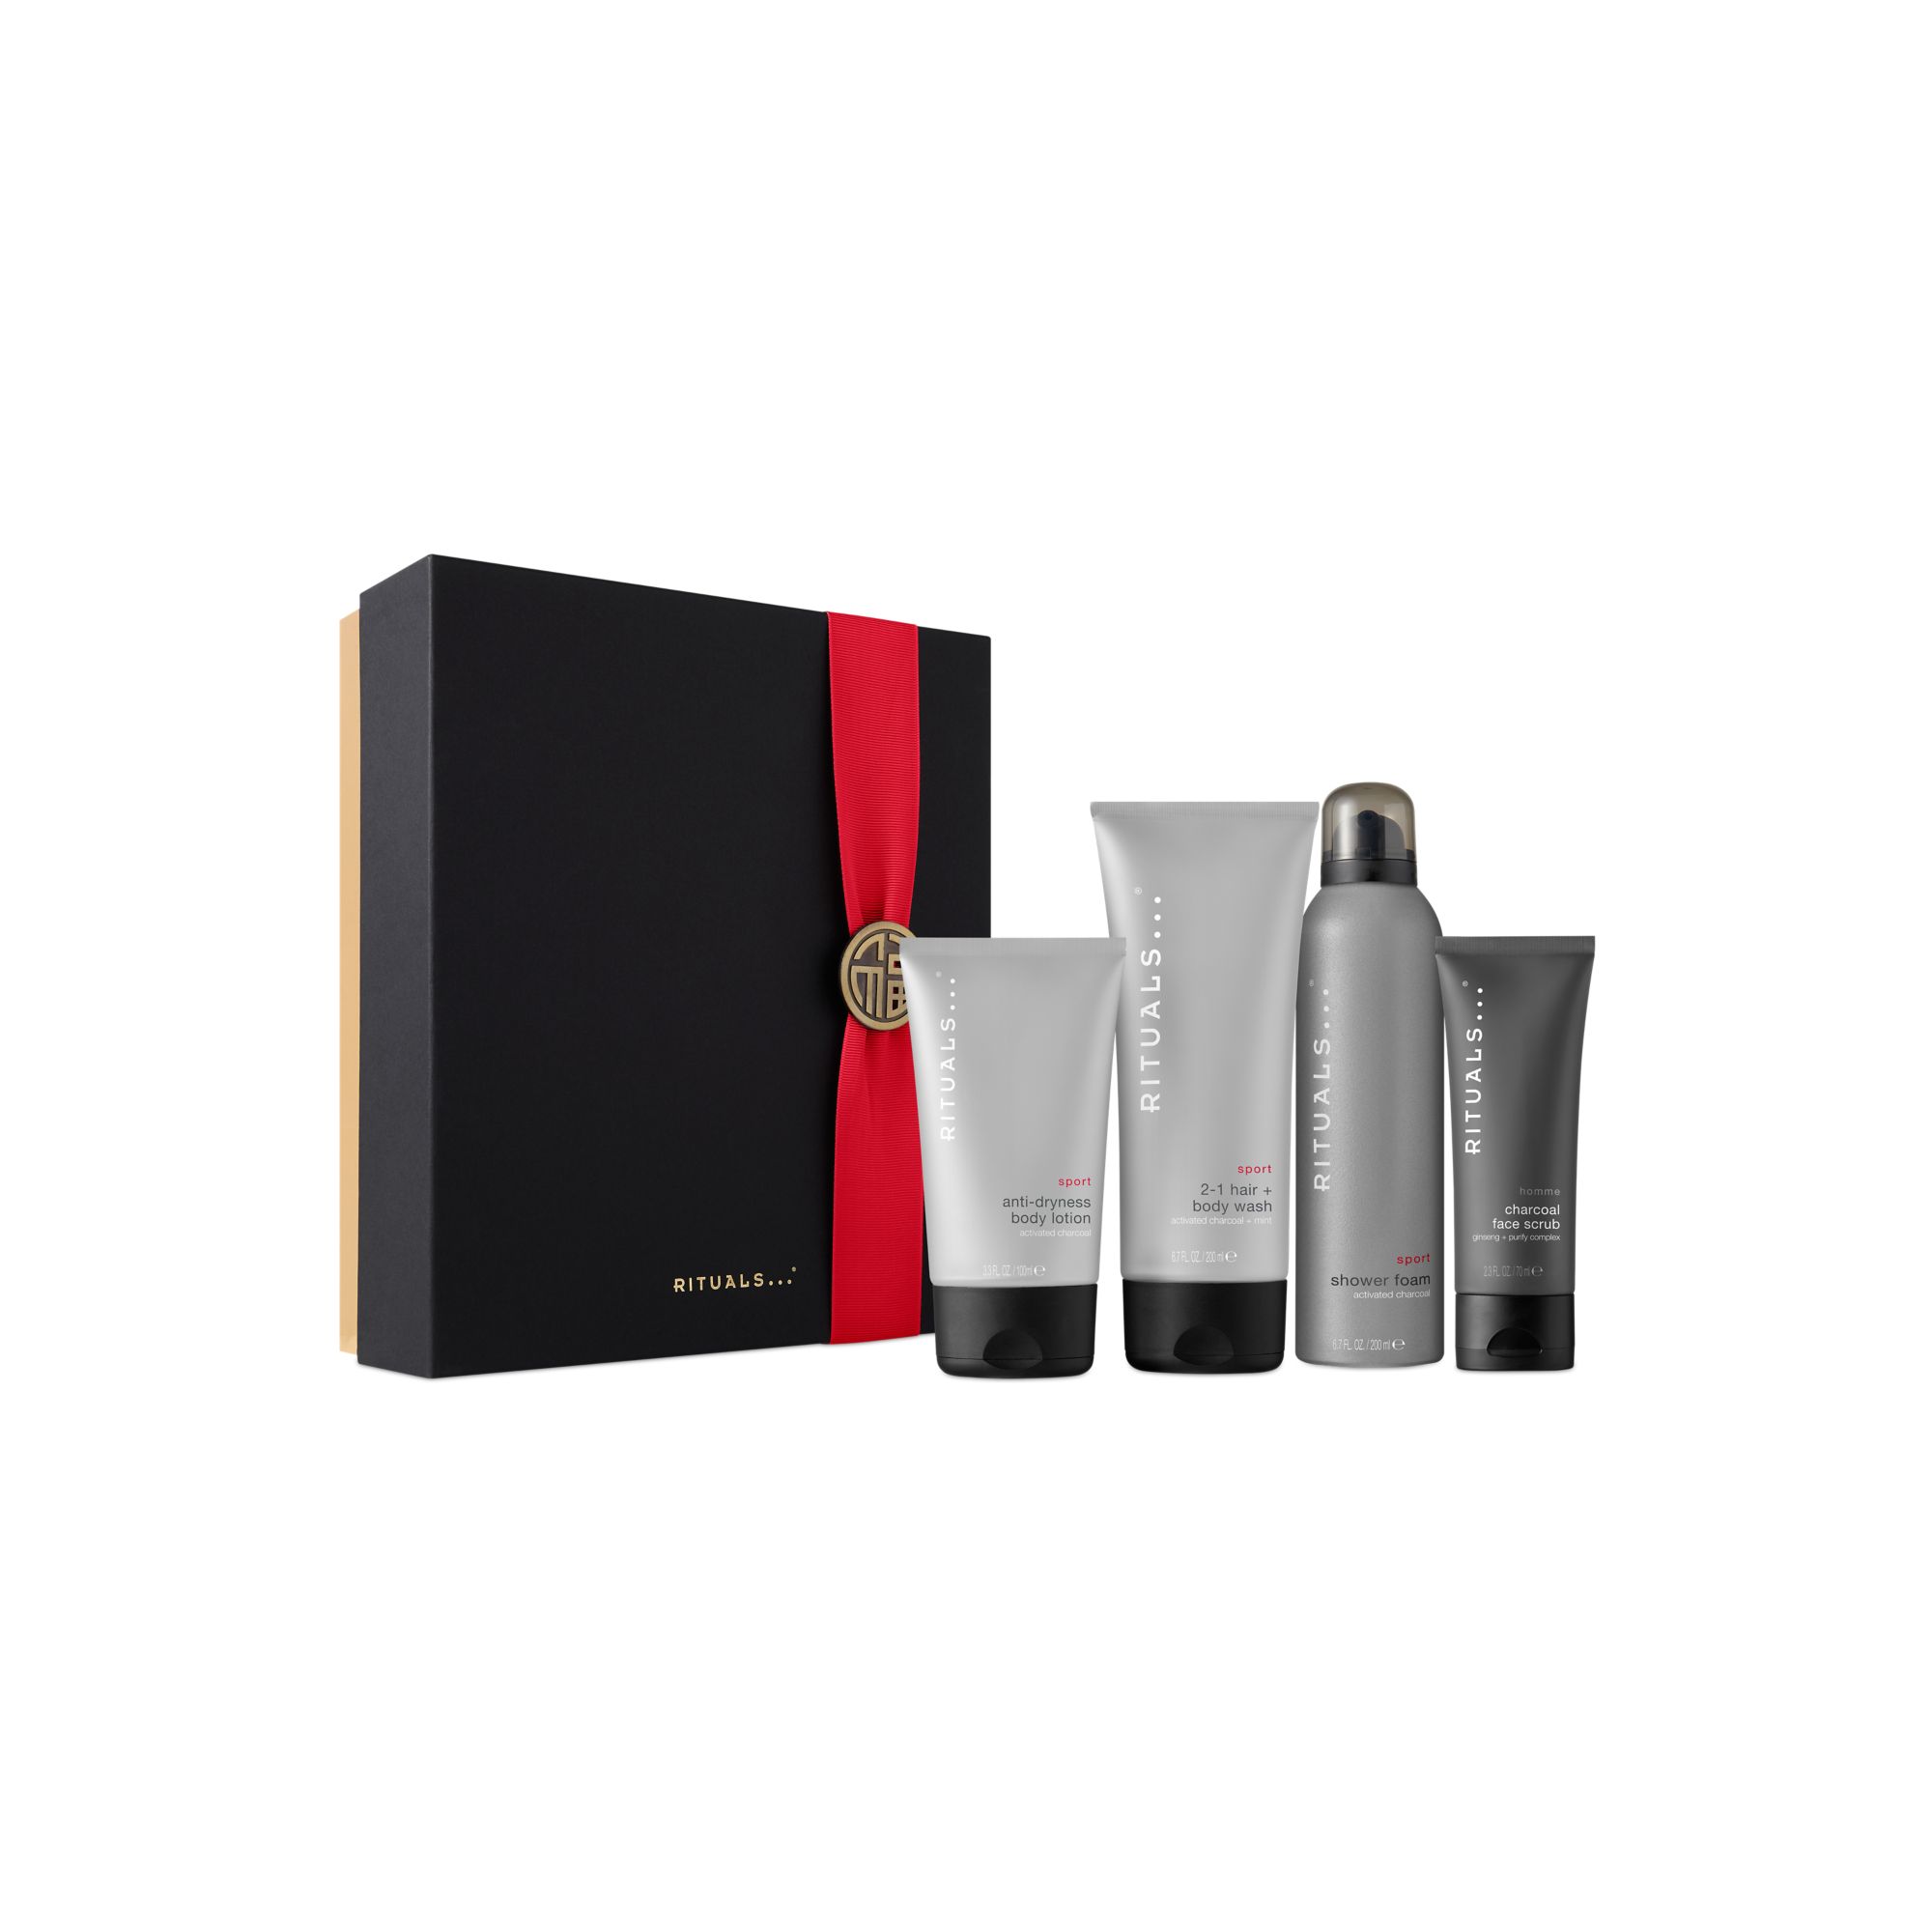 Rituals The Ritual of Homme - Medium Limited Gift Set, Herren, Sets